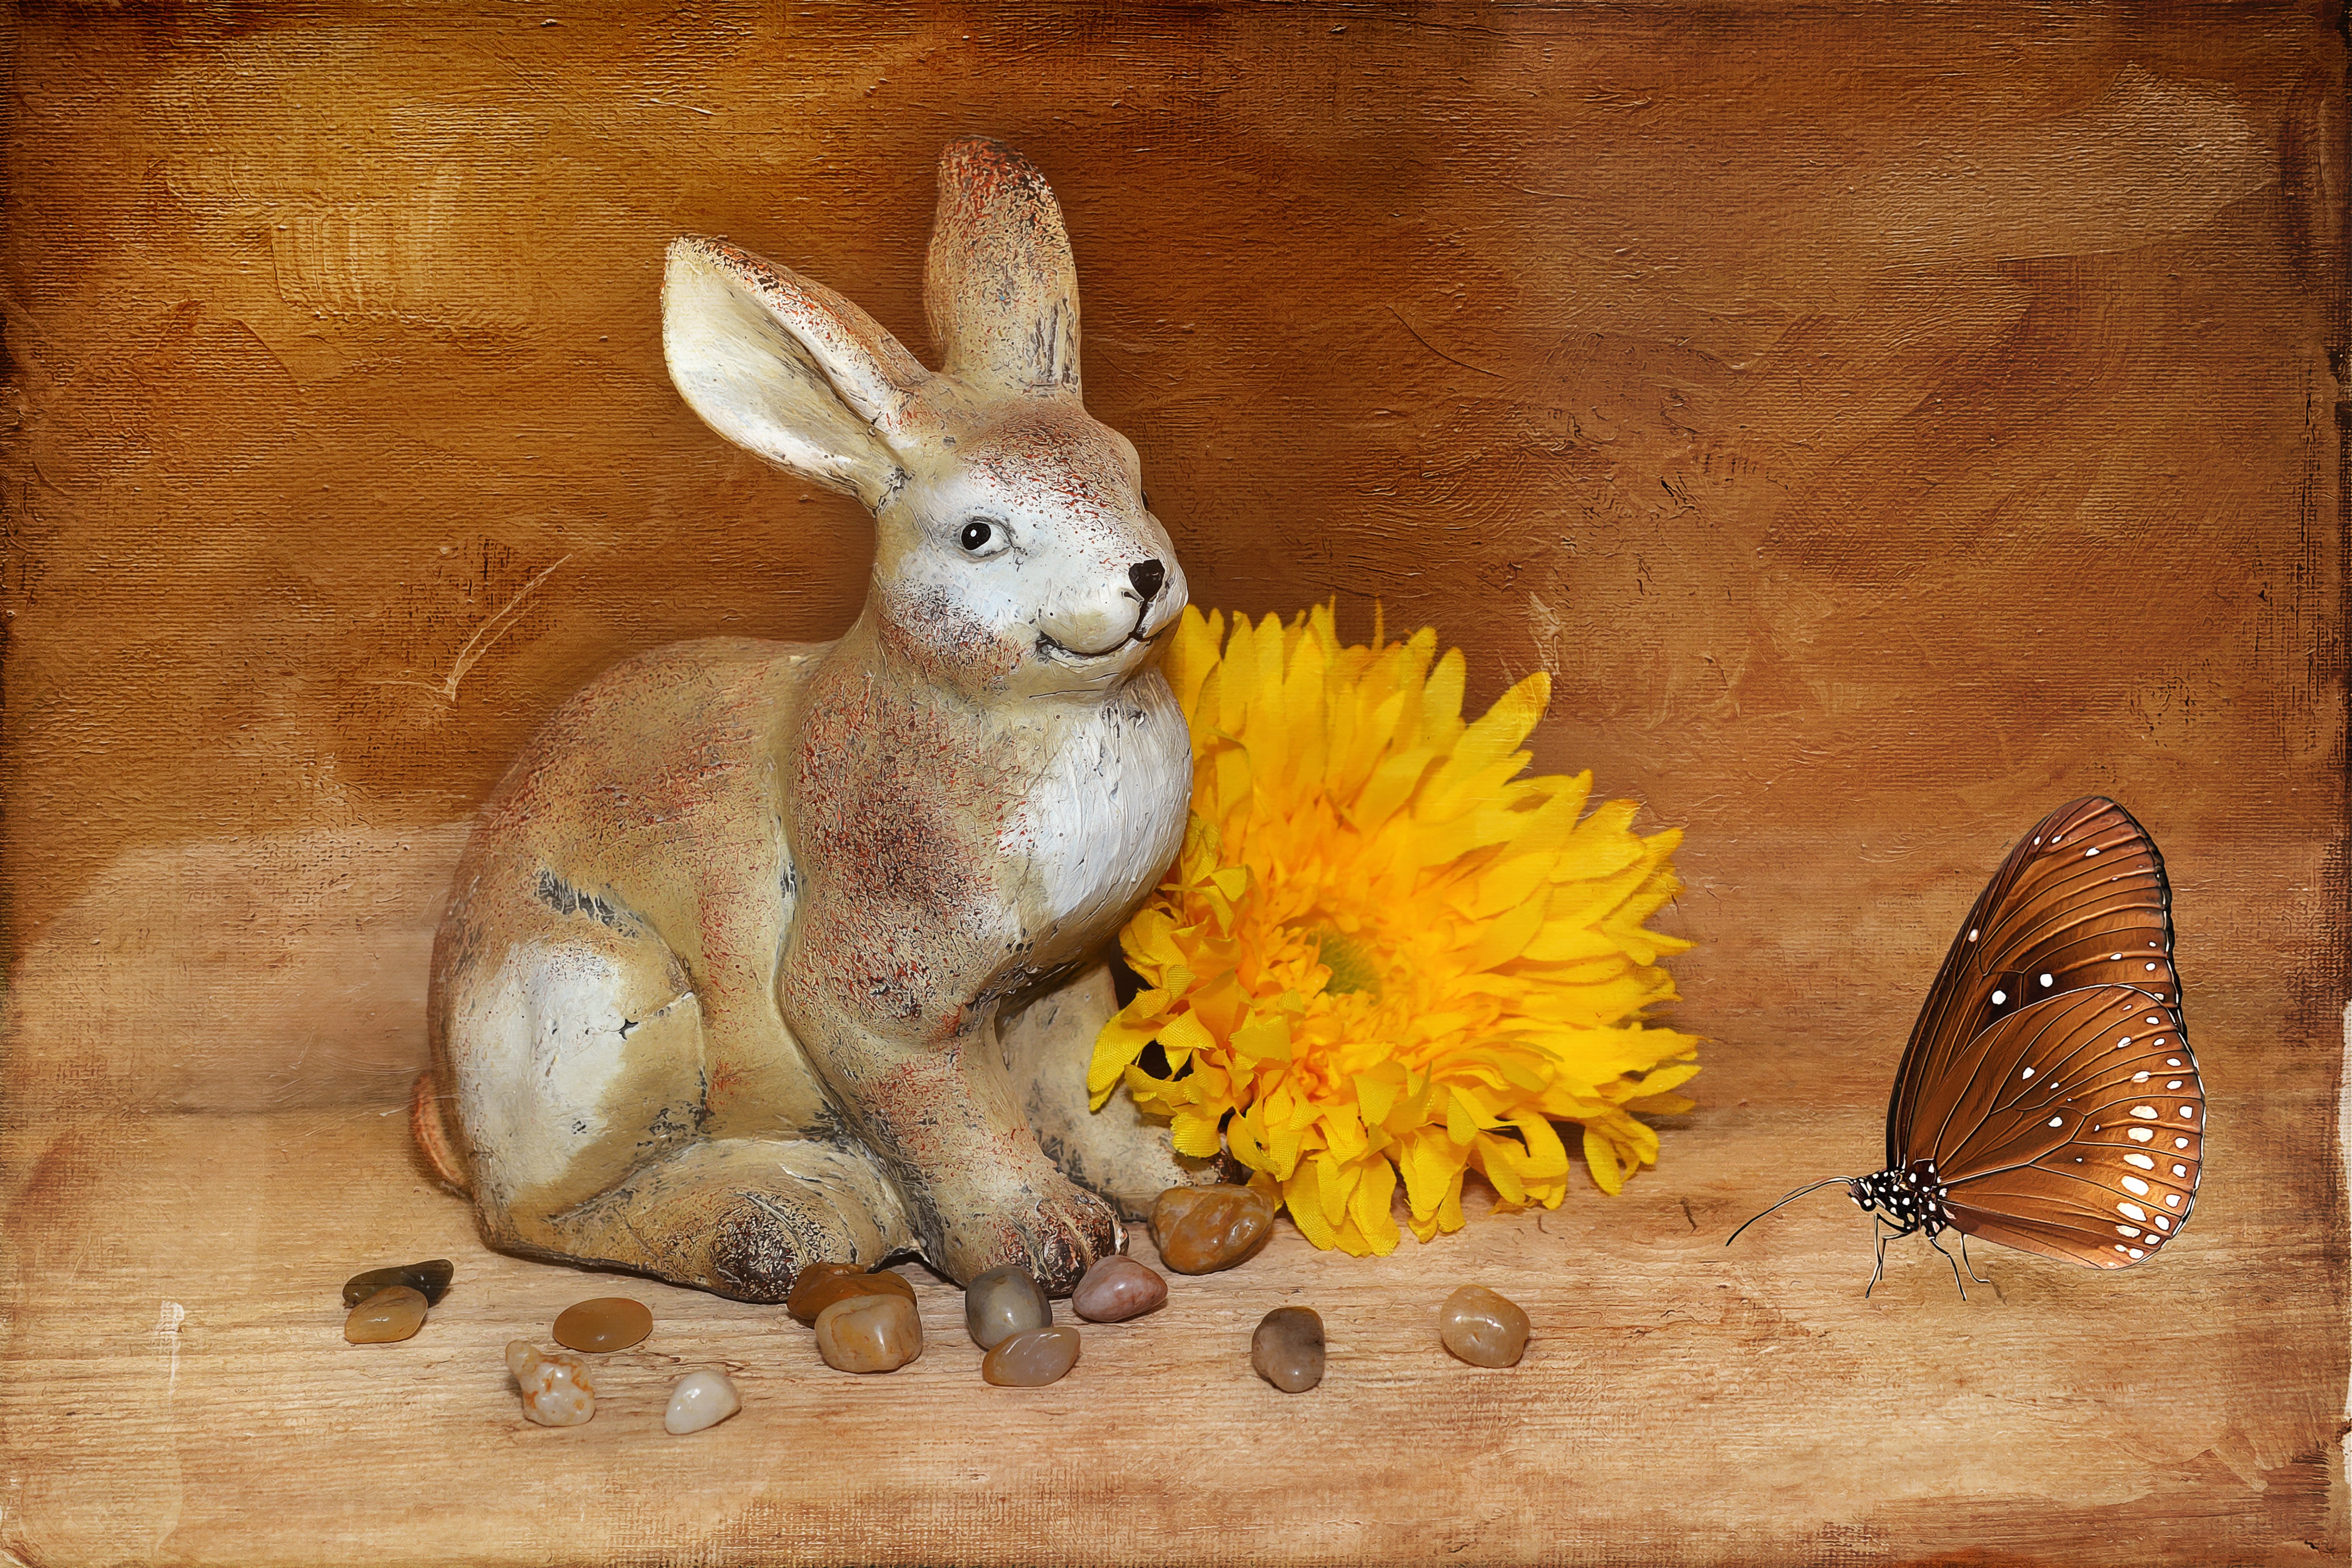 brown ceramic hare figurine beside sunflower and butterfly figurine